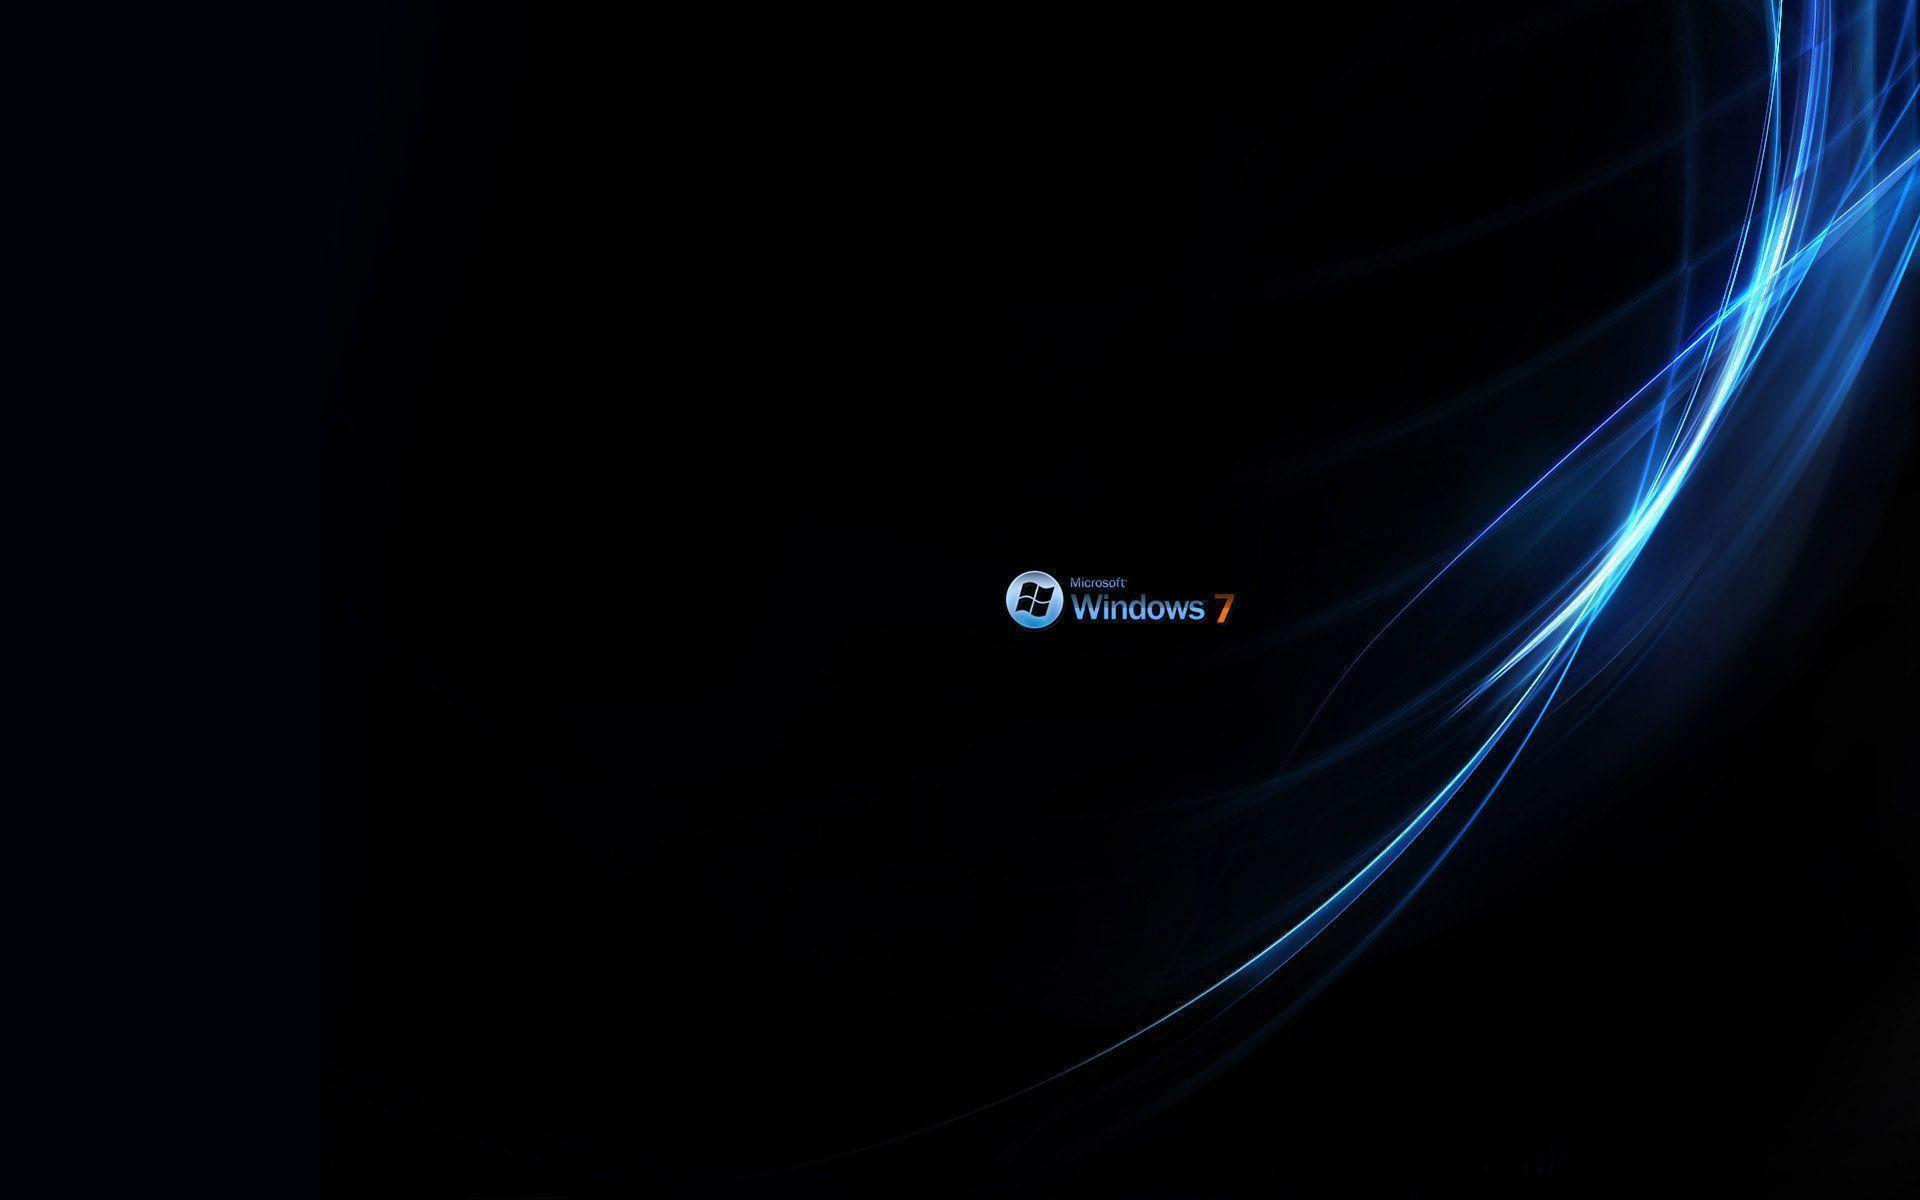 Awesome Windows 7 Wallpaper for Your Desktop